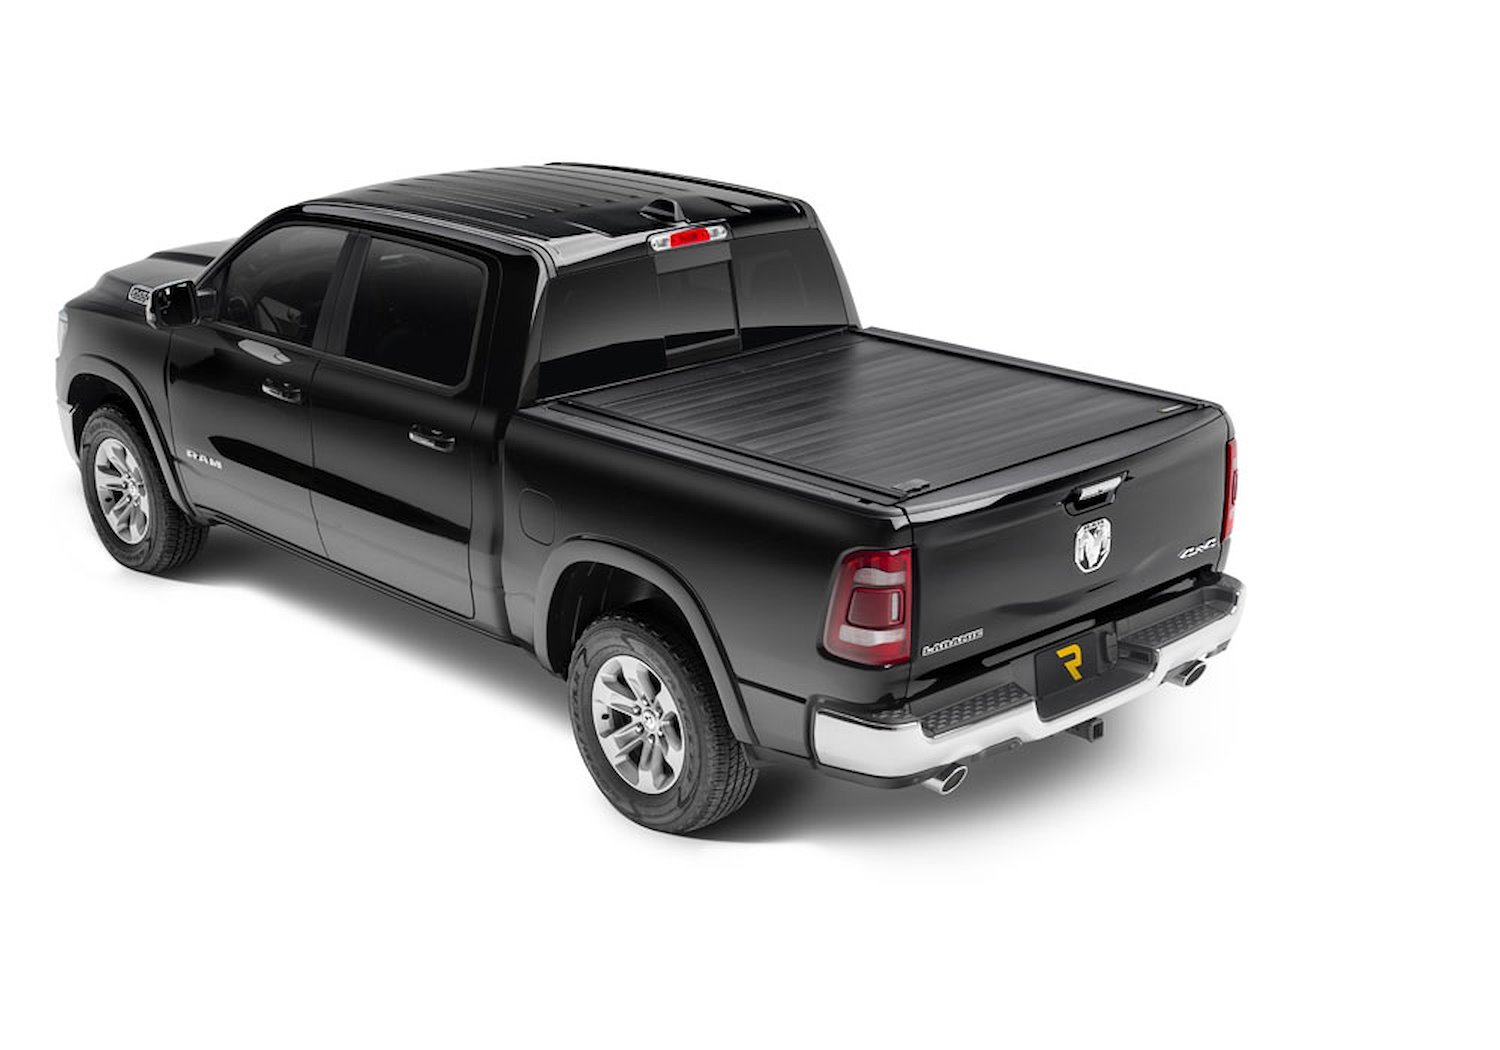 80222 RetraxPRO MX Retractable Tonneau Cover 2002-2008 Dodge Ram 1500/2003-2009 2500/3500 6' 4" Bed without Stake Pockets